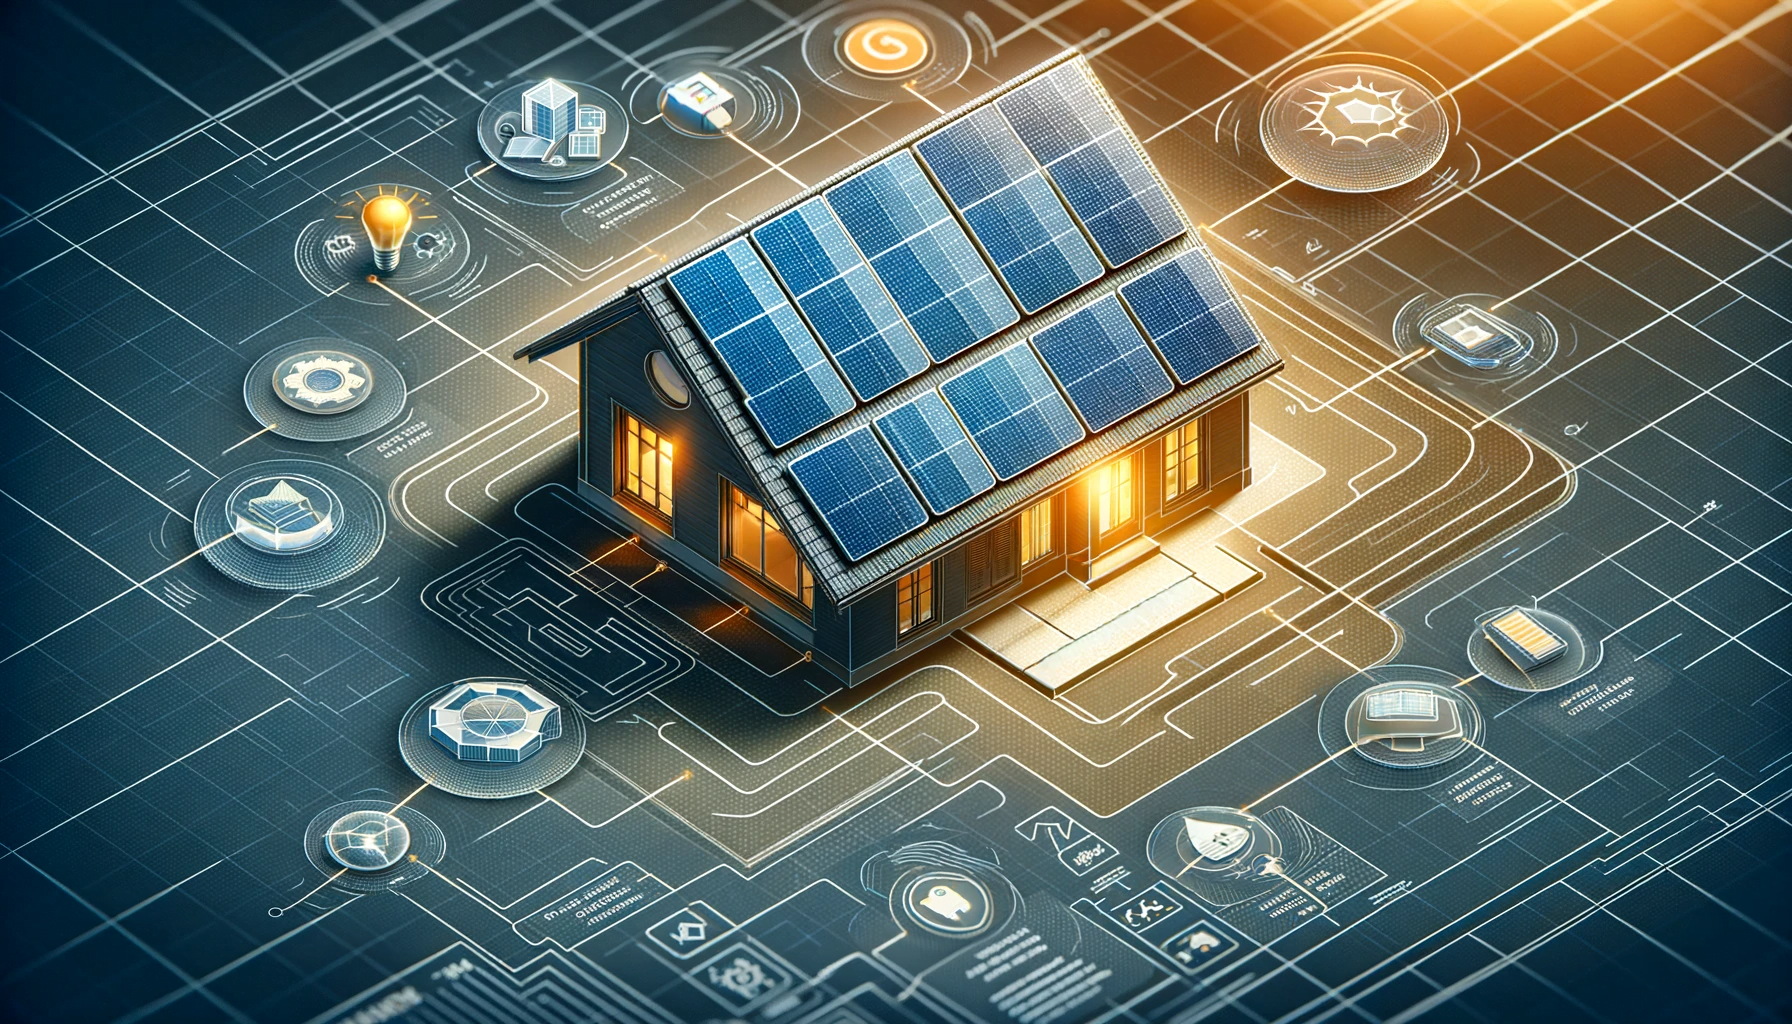 8 Things You Should Know Before Buying a House With Solar Panels